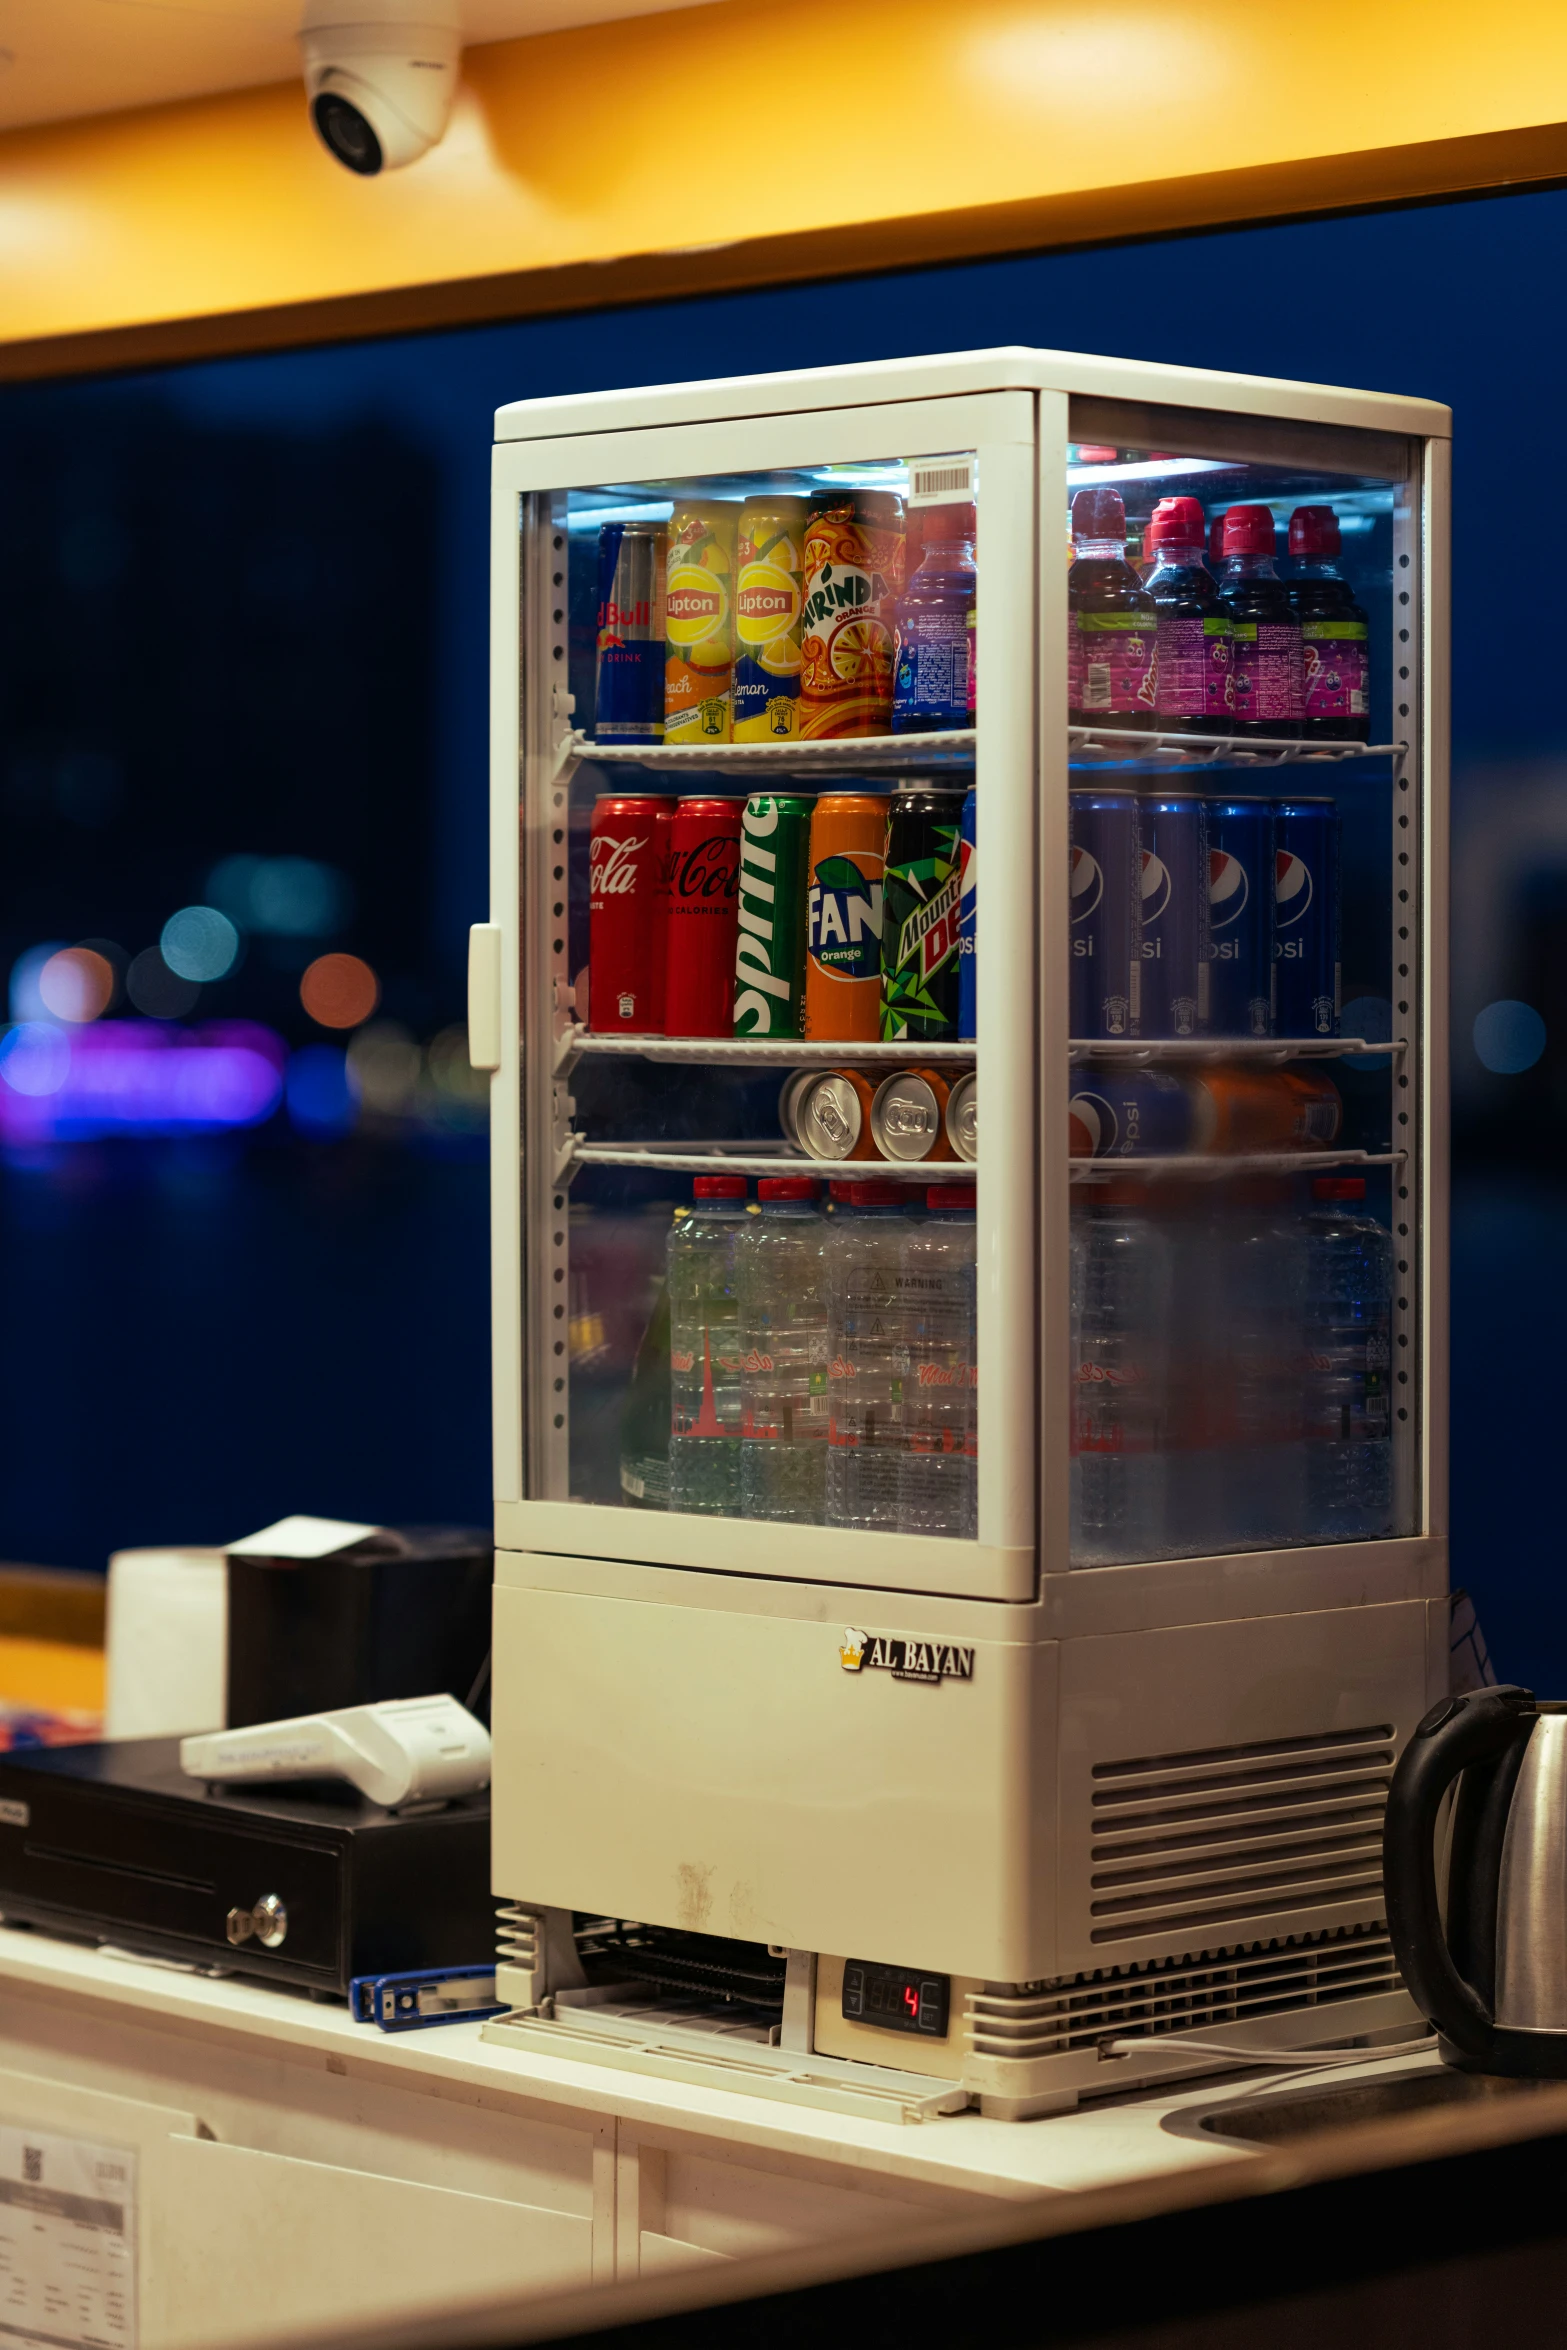 a refrigerated refrigerator in the foreground with a bottle of soda and drinks inside